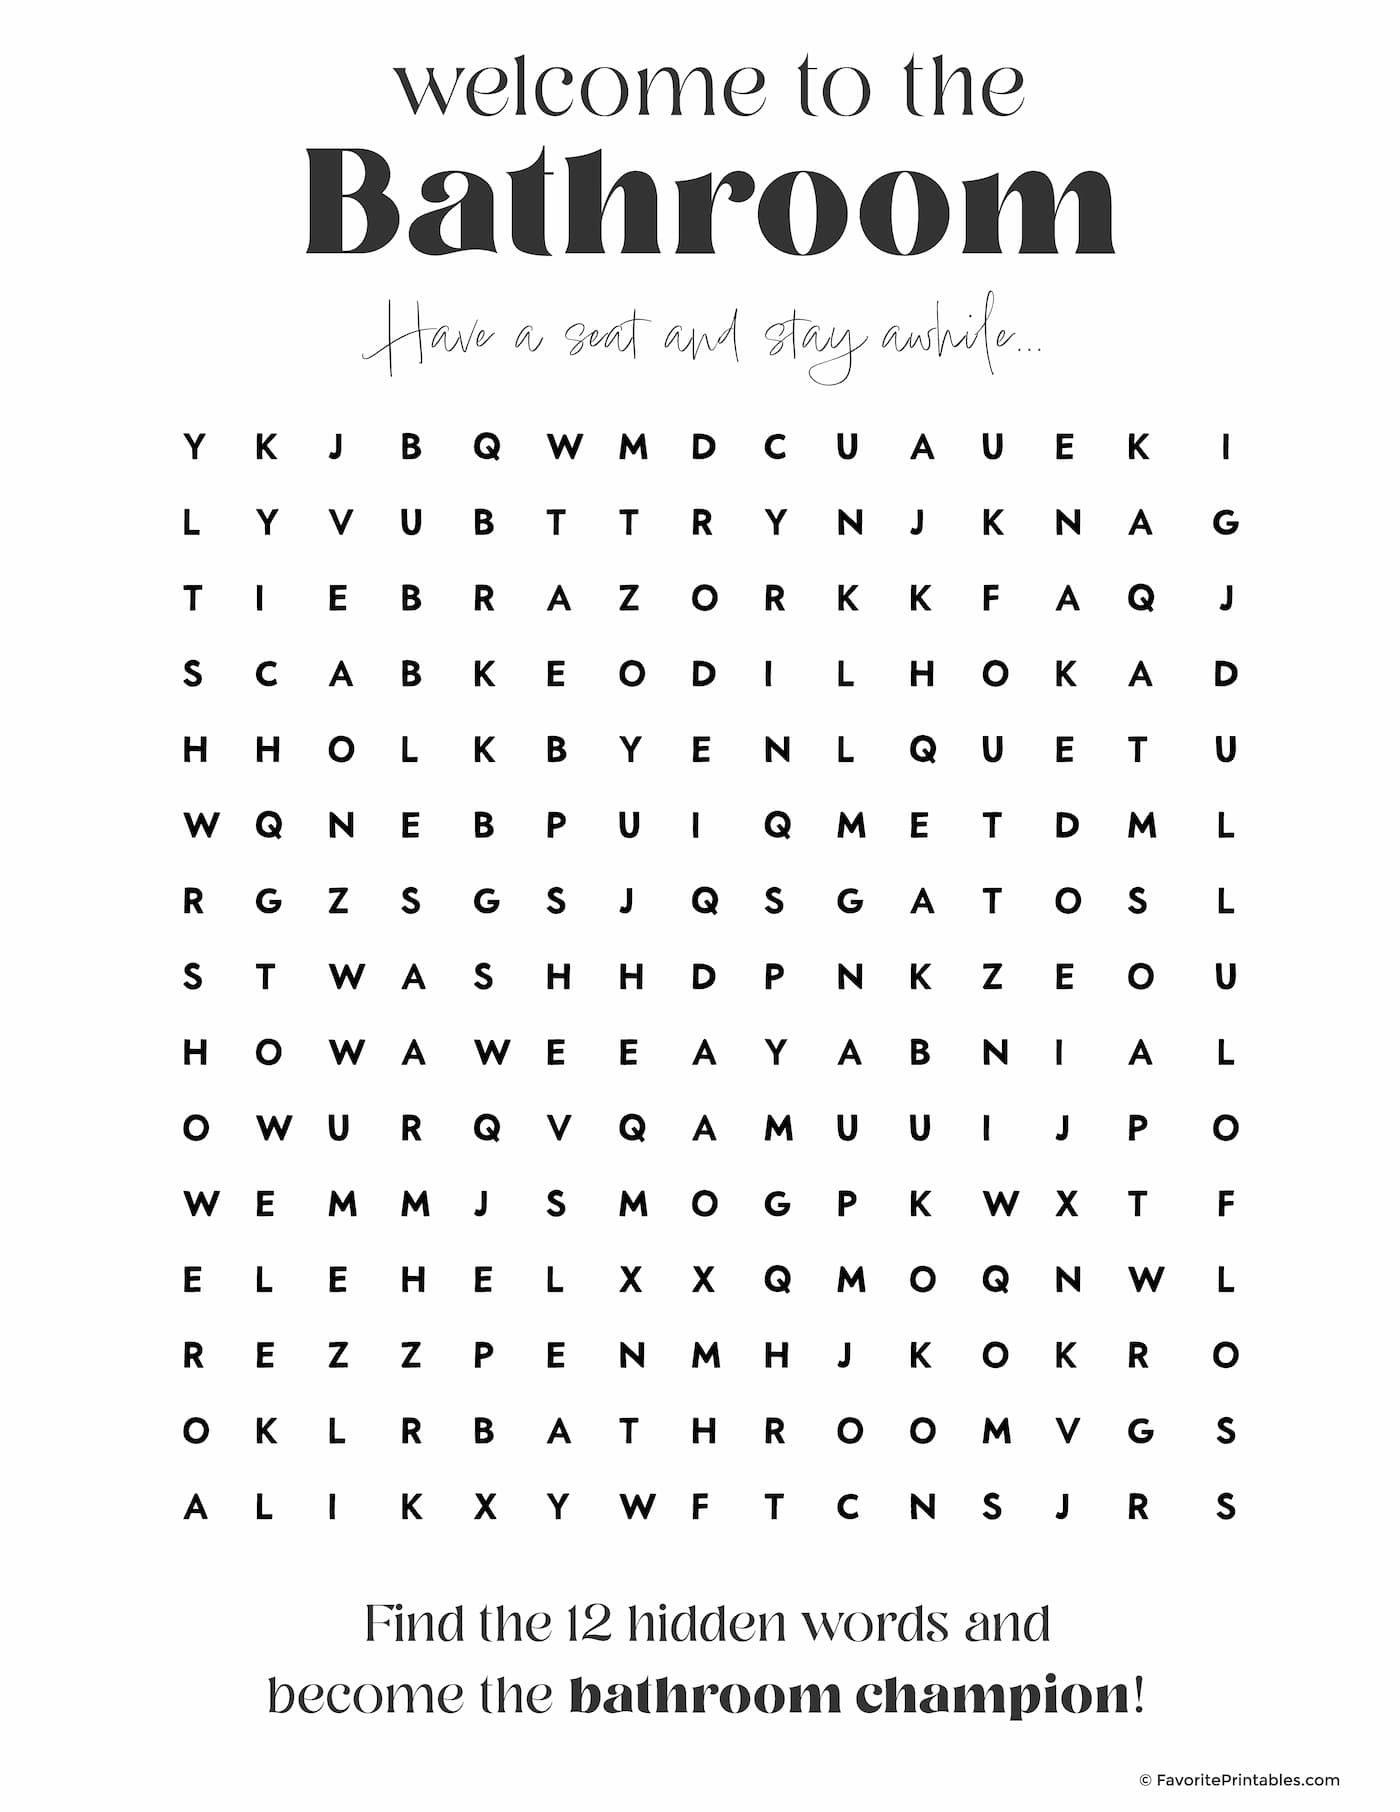 Bathroom word search printable preview.